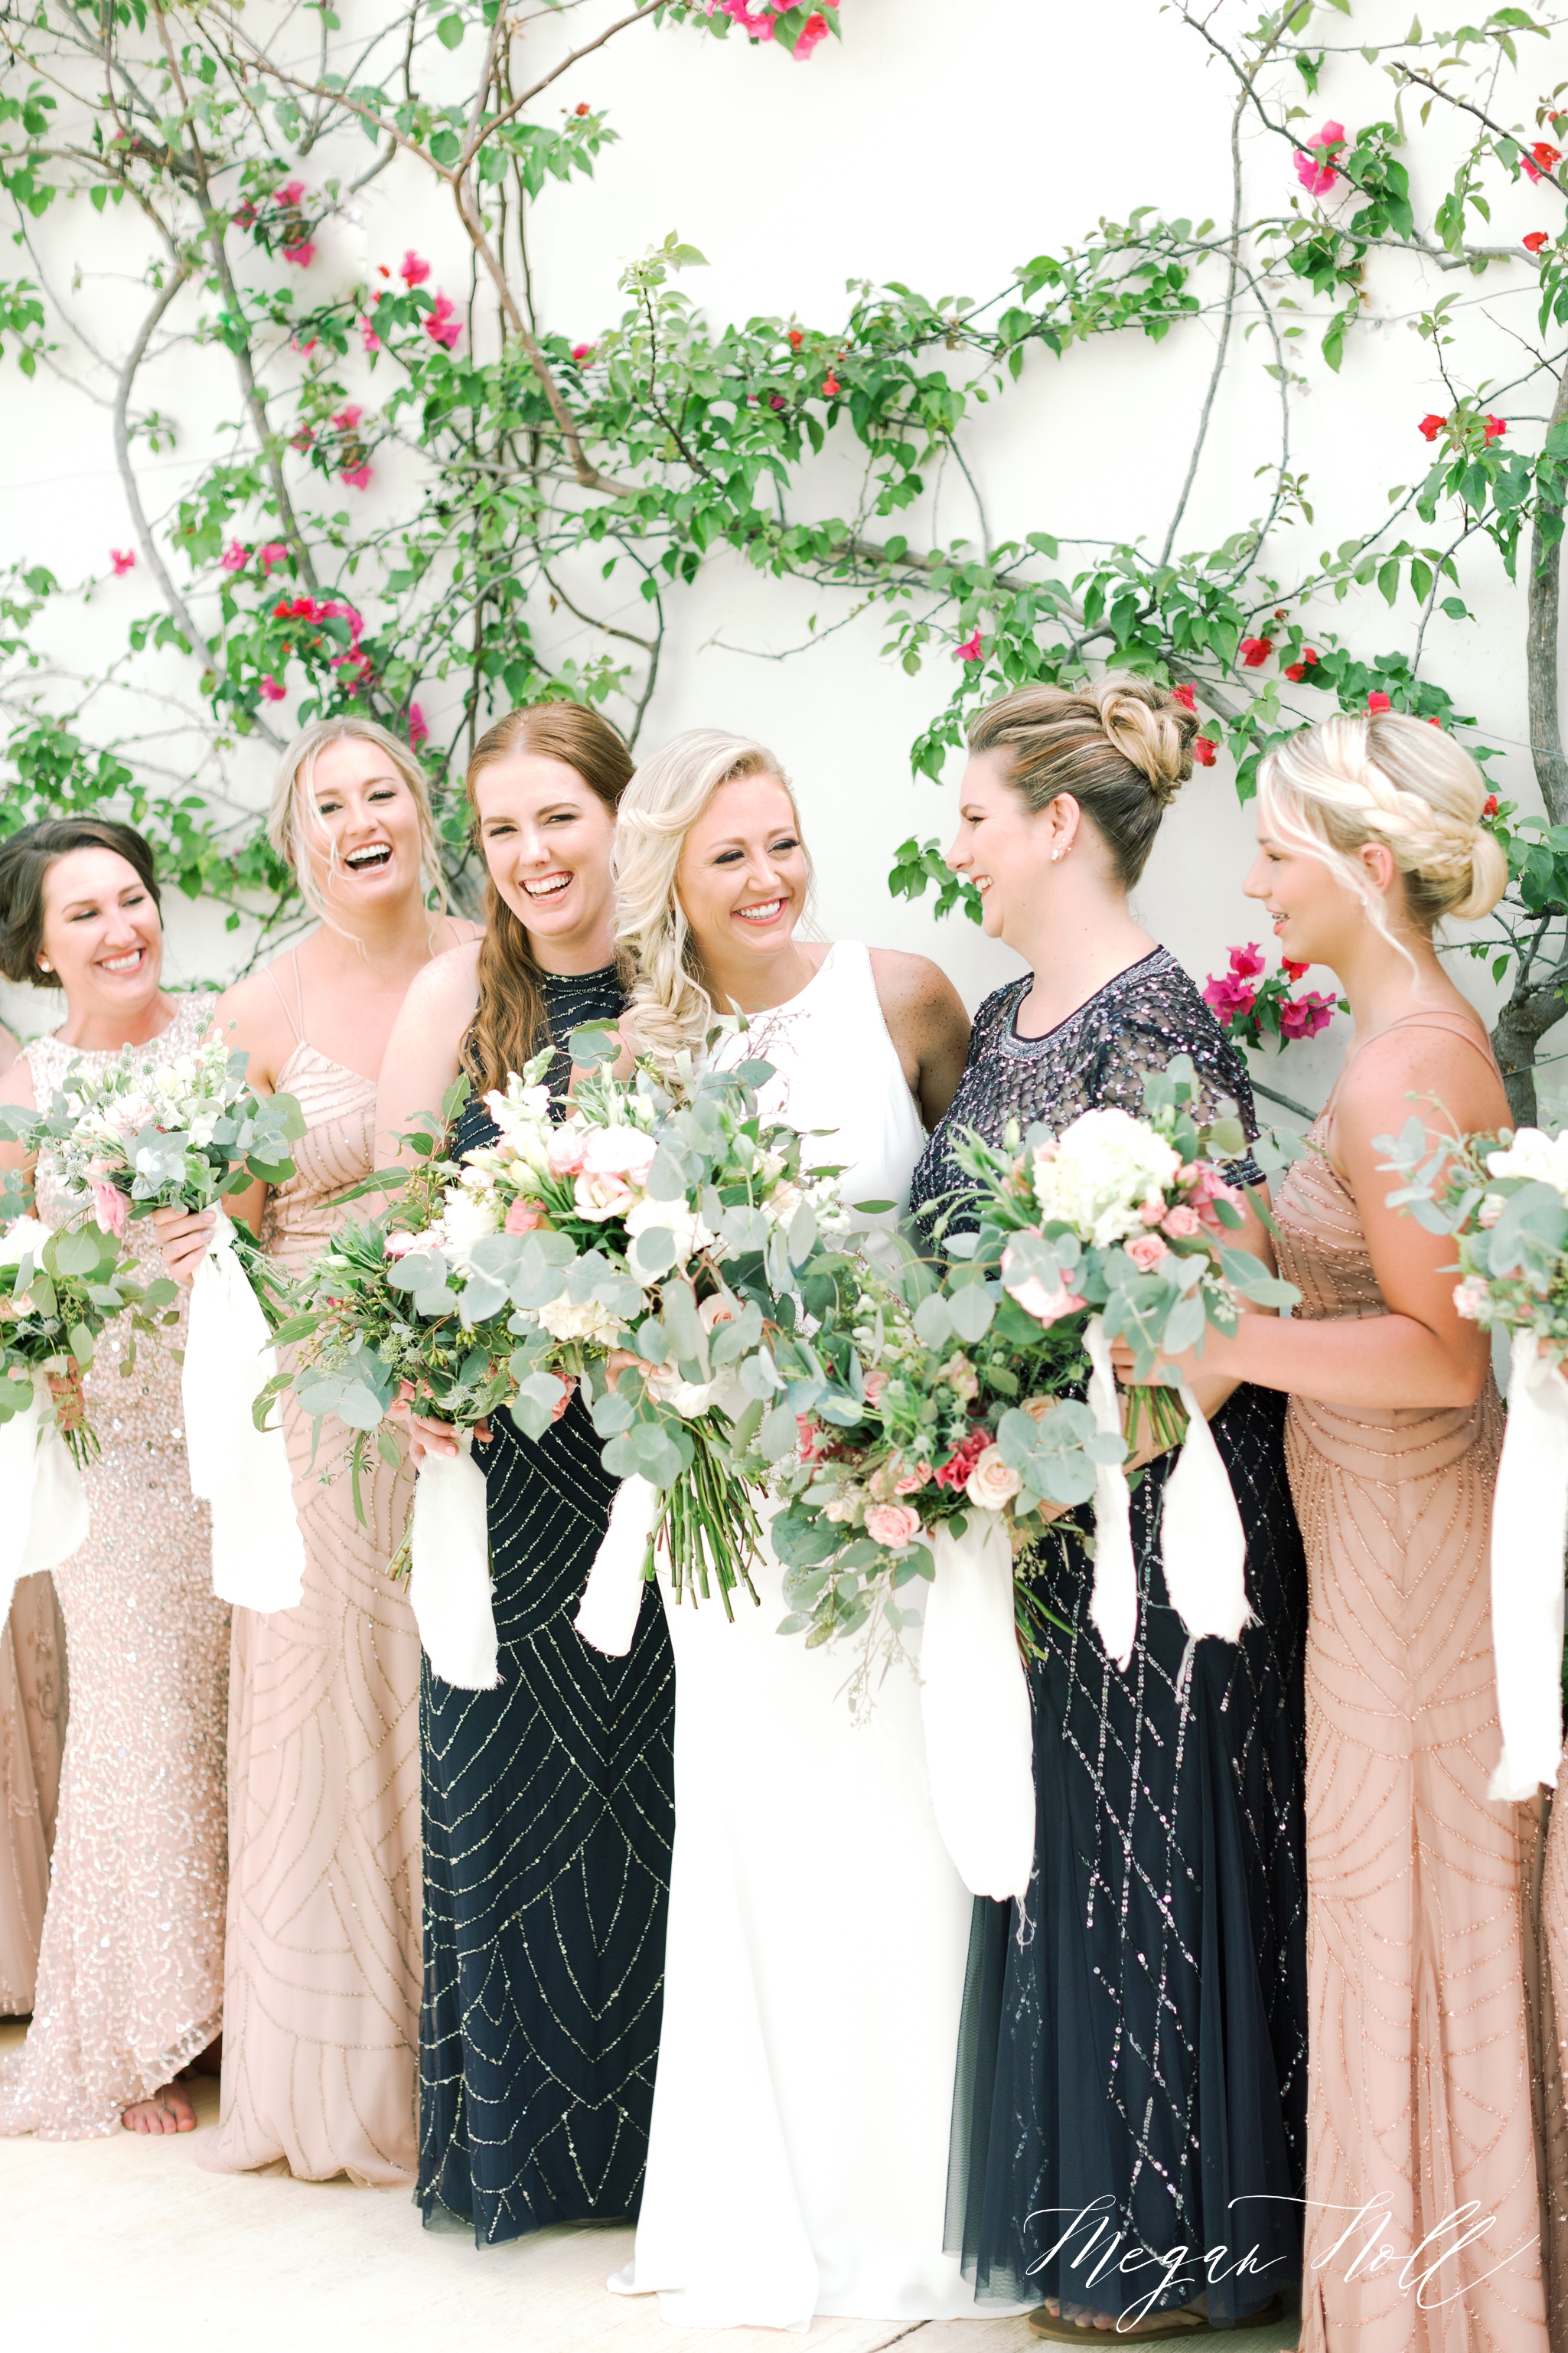 Bridesmaids lined up, holding bouquets in Cancun for a destination wedding